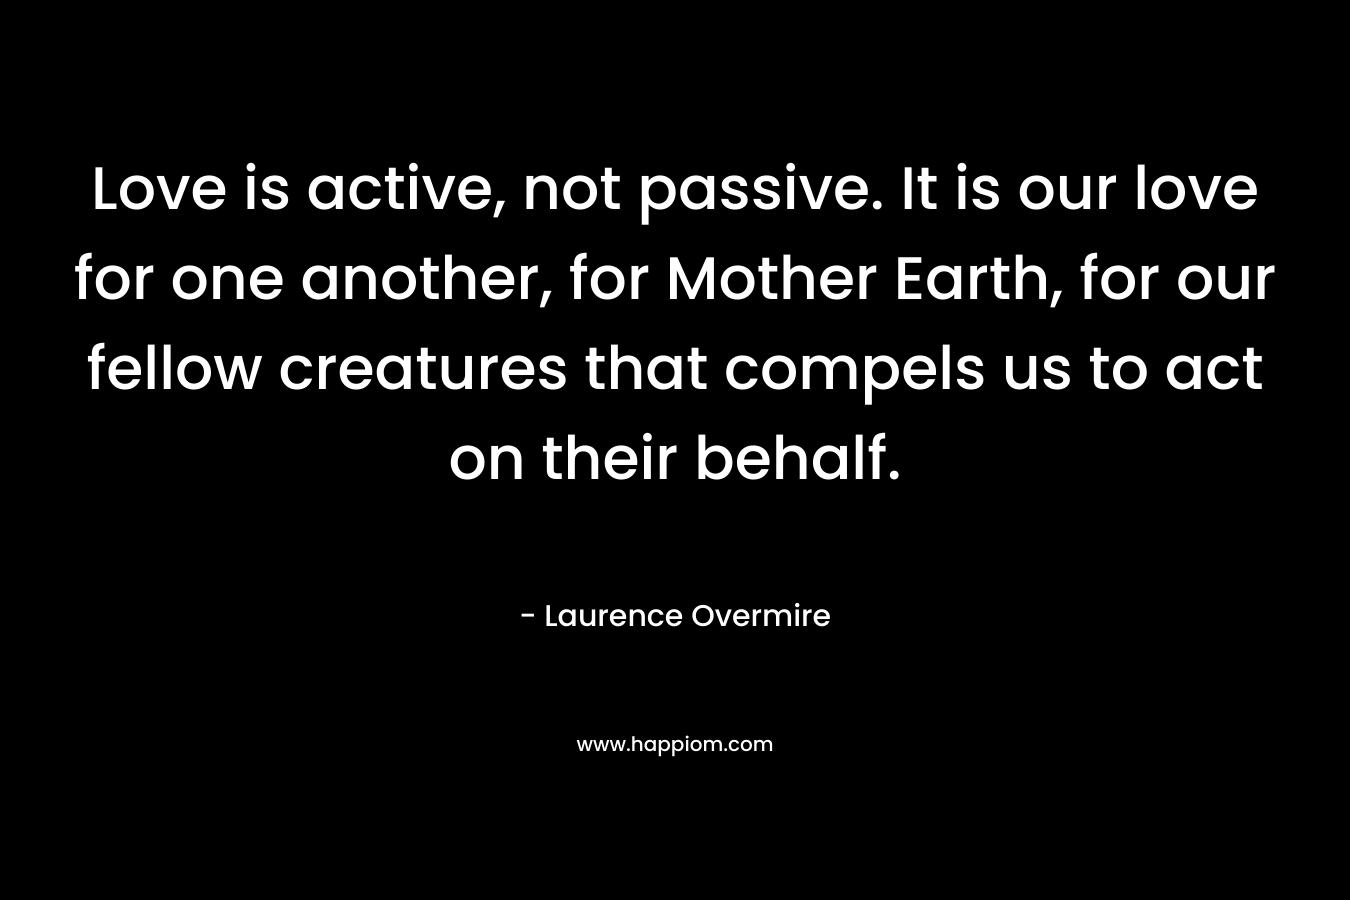 Love is active, not passive. It is our love for one another, for Mother Earth, for our fellow creatures that compels us to act on their behalf.